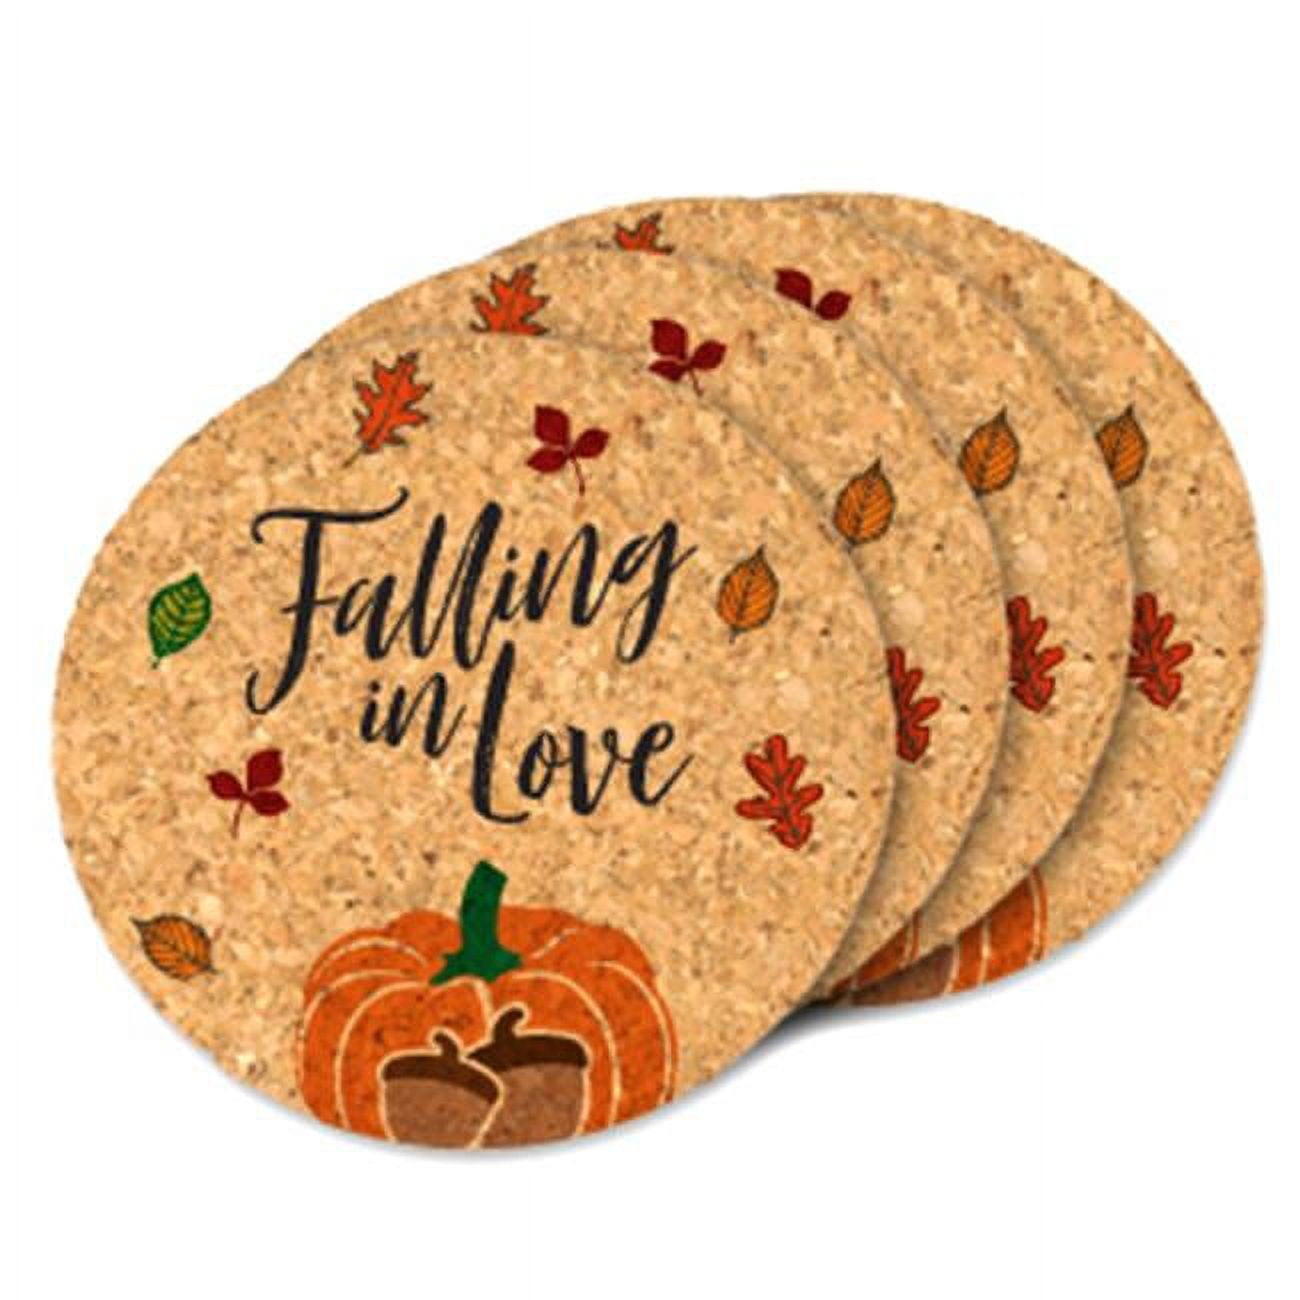 Picture of Ducky Days 8417183 4 in. Dia. Falling in Love Round Cork Coaster Wedding Favors - Set of 2